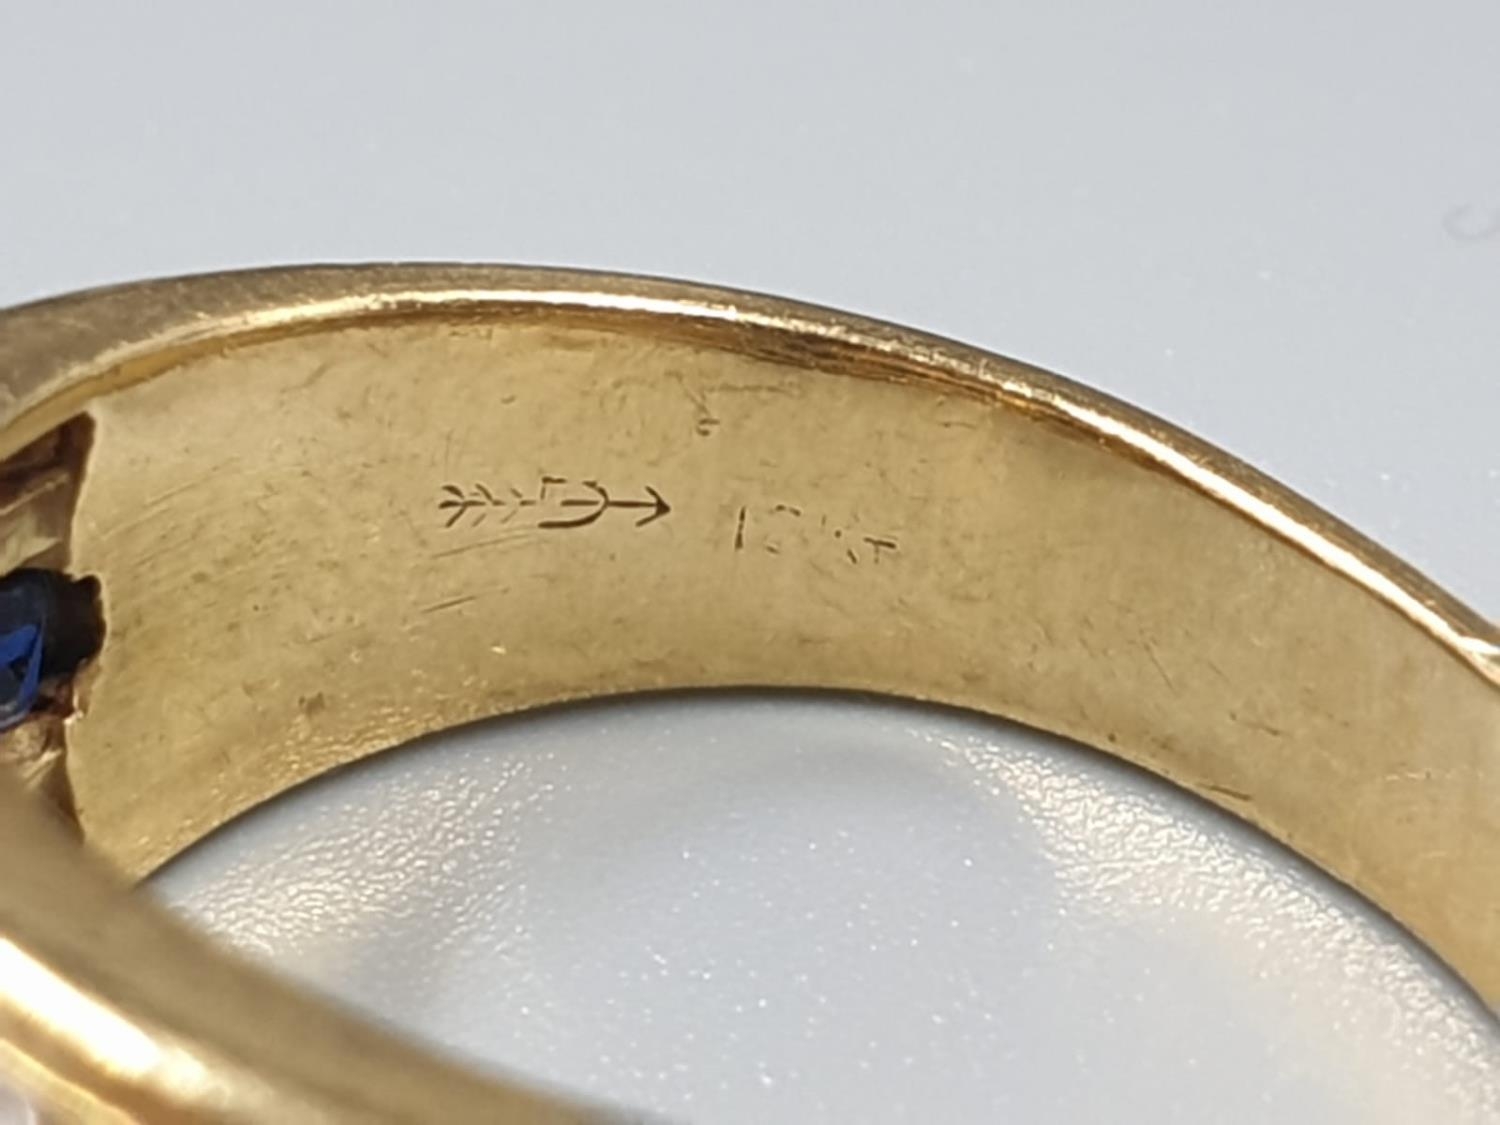 AN 18CT GOLD RING WITH CHANNEL SET DIAMONDS AND SAPHIRES 7.4gms SIZE N - Image 6 of 7